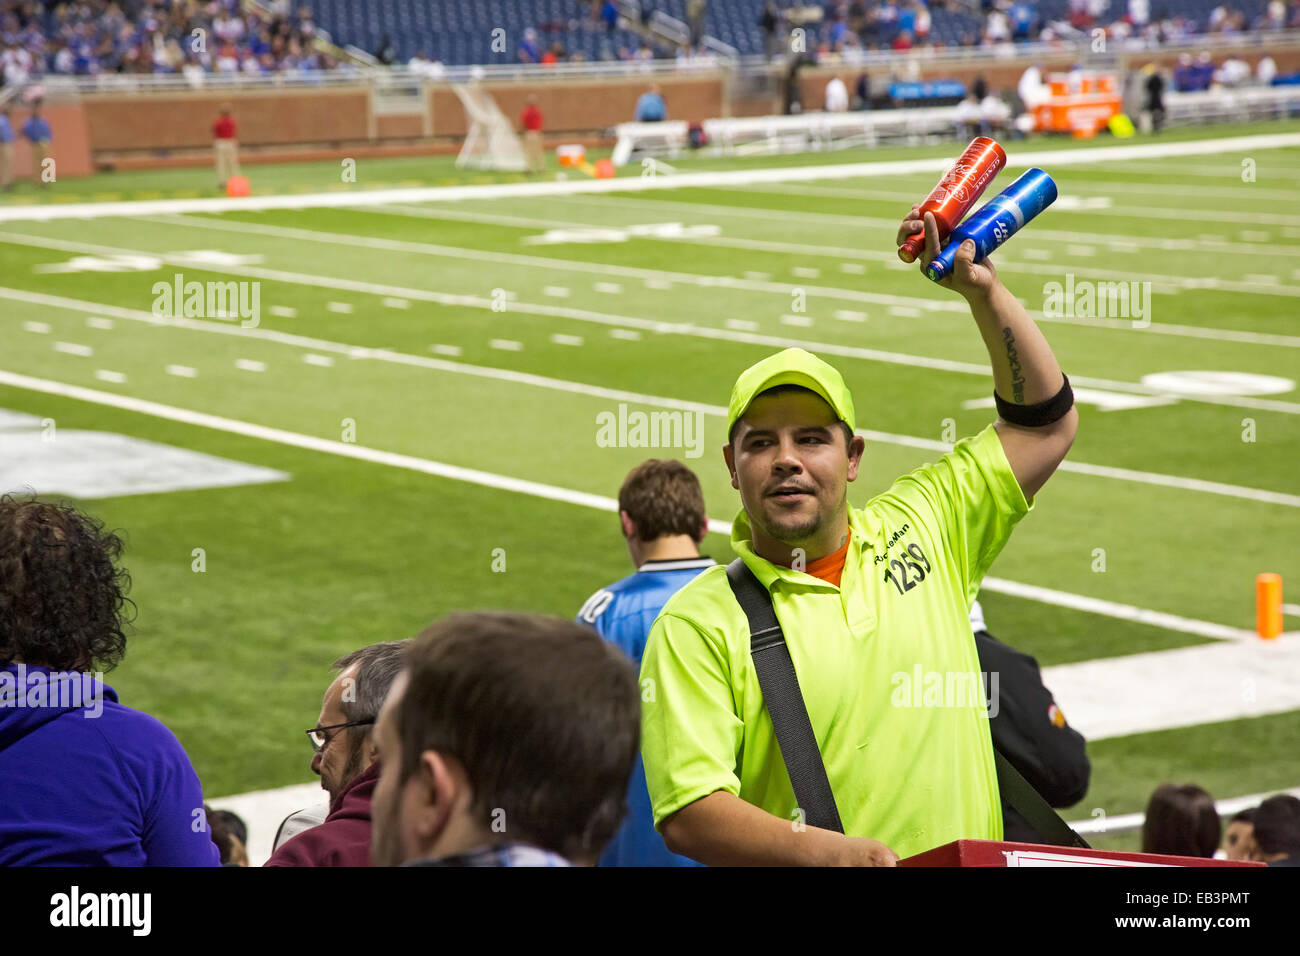 Detroit, Michigan - A vendor sells beer during a National Football League game at Ford Field. Stock Photo